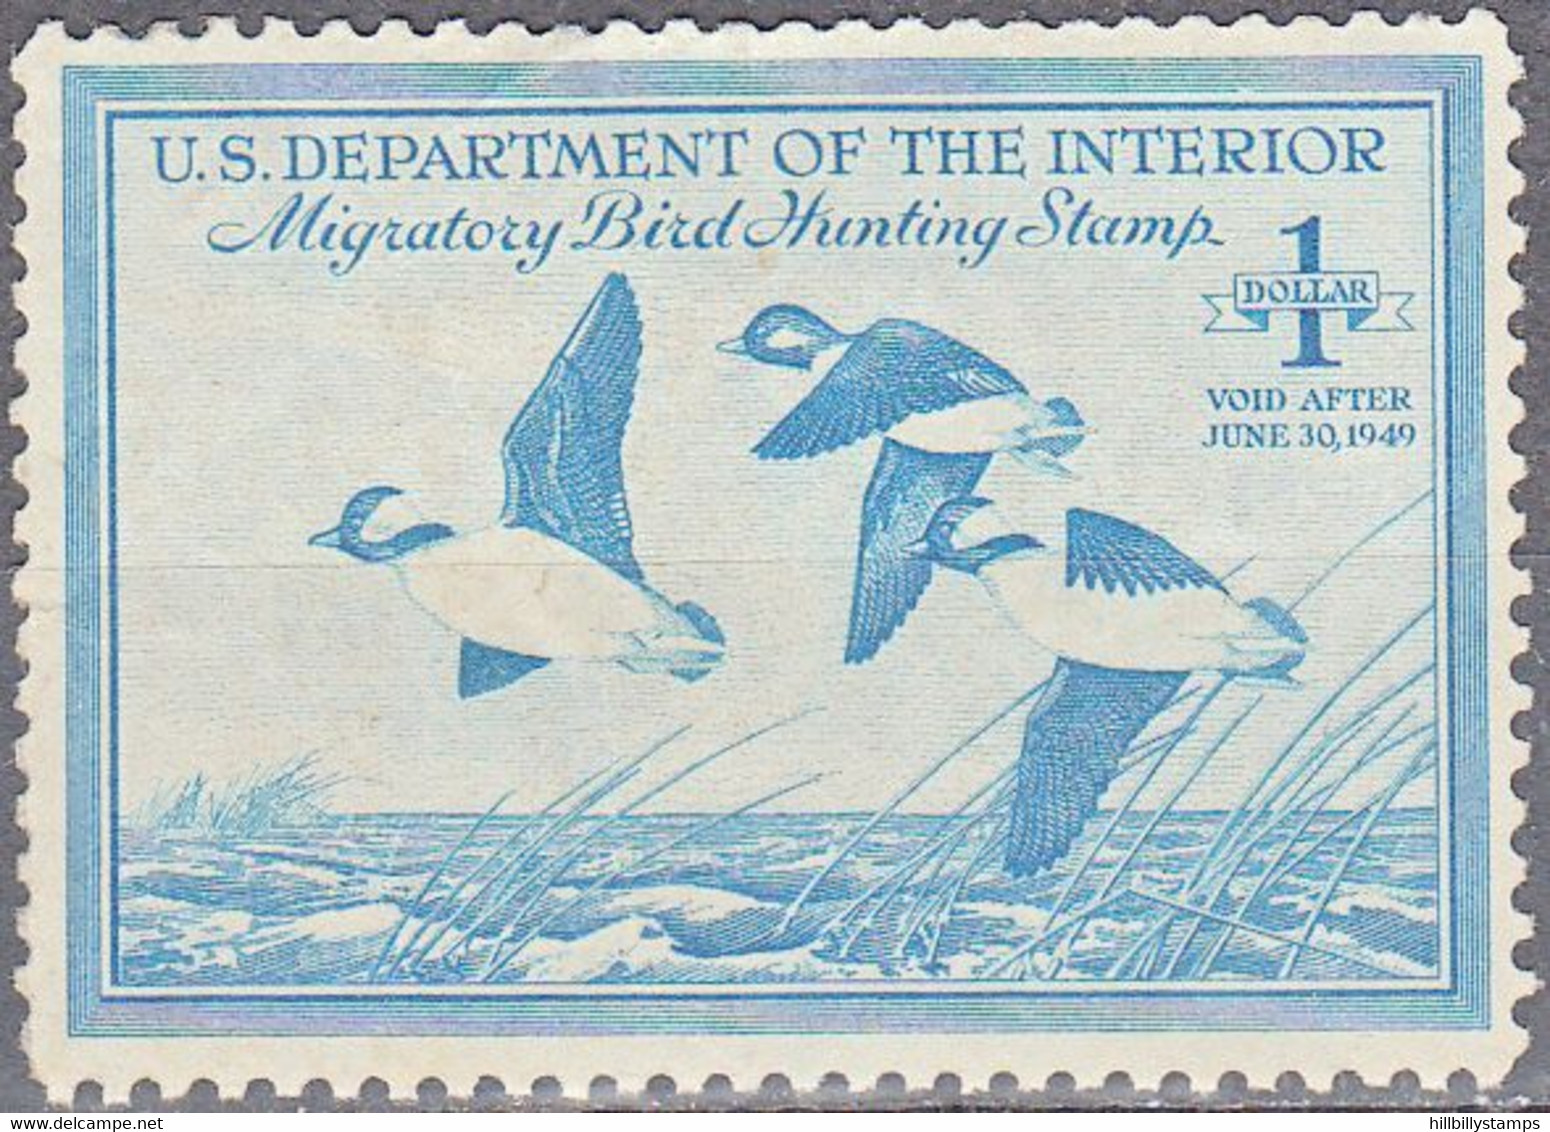 UNITED STATES  SCOTT NO RW15  MINT HINGED  YEAR  1948 - Duck Stamps